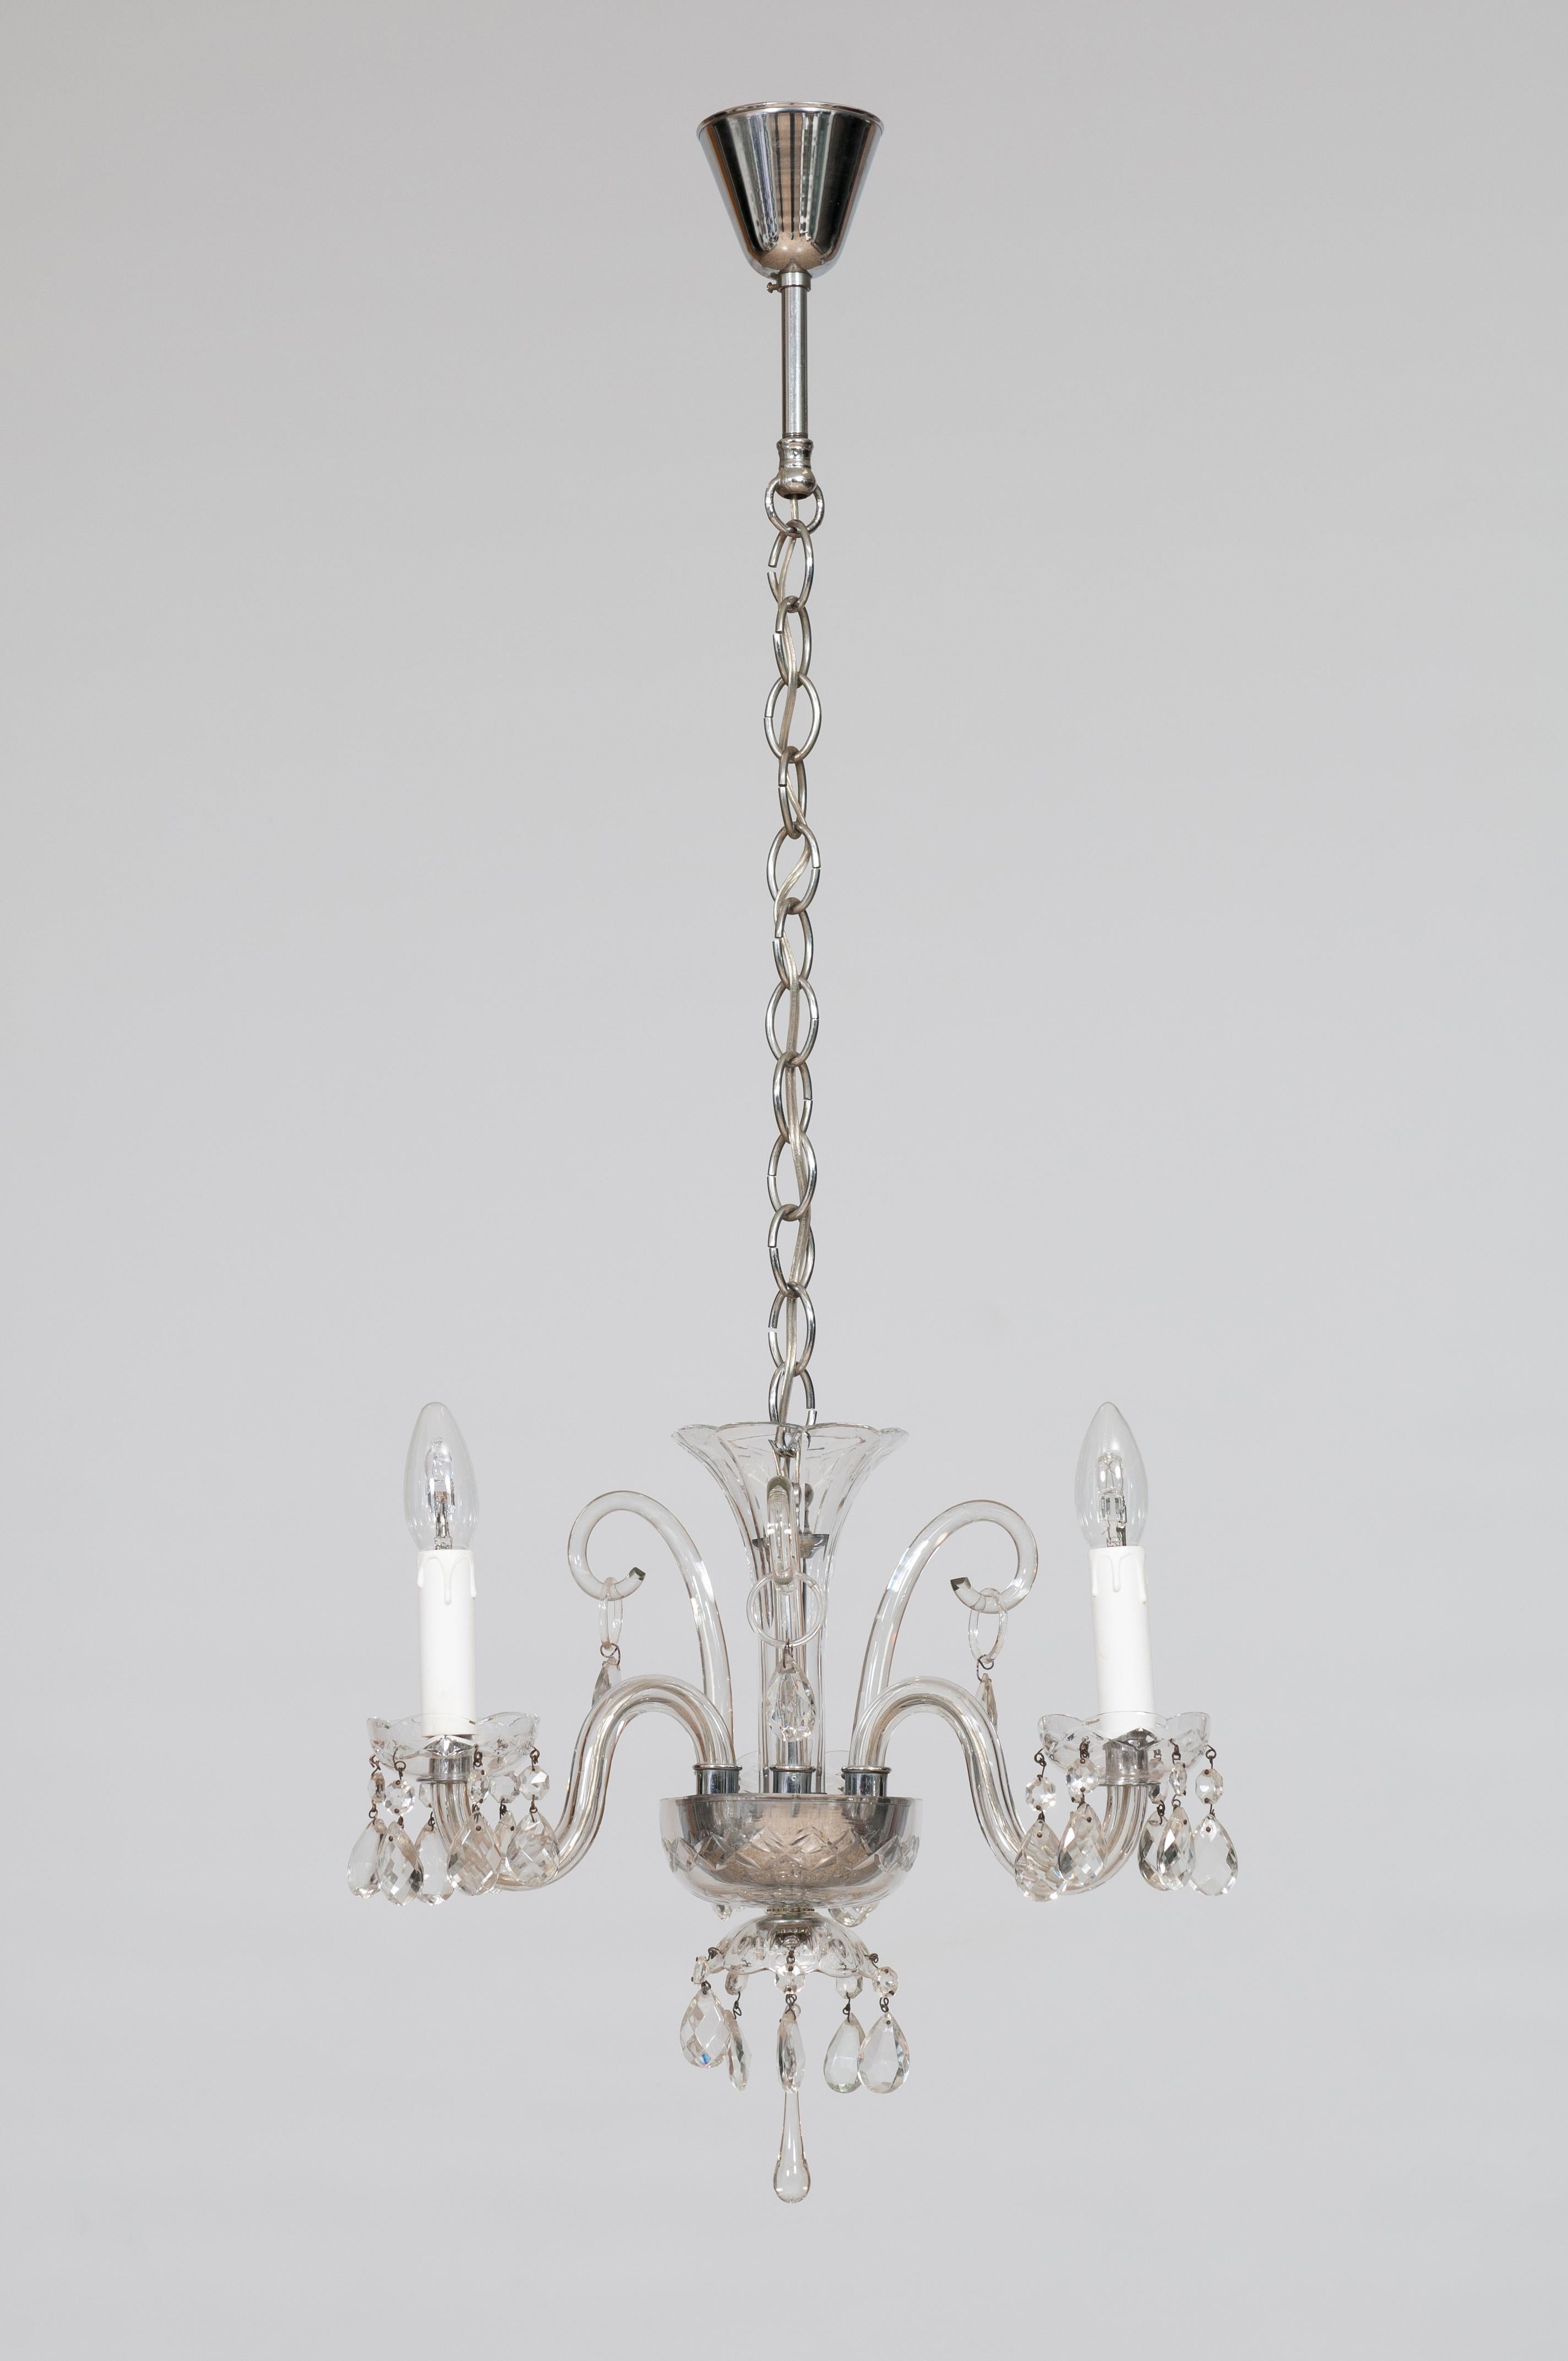 Maria Theresa Chandelier in Transparent Shiny Murano Glass 1980s Venice Italy.
This elegant Maria Teresa chandelier, entirely handmade in Murano – the worldwide known Venetian island for its unrivaled blown glass tradition – dates back to the 1980s.